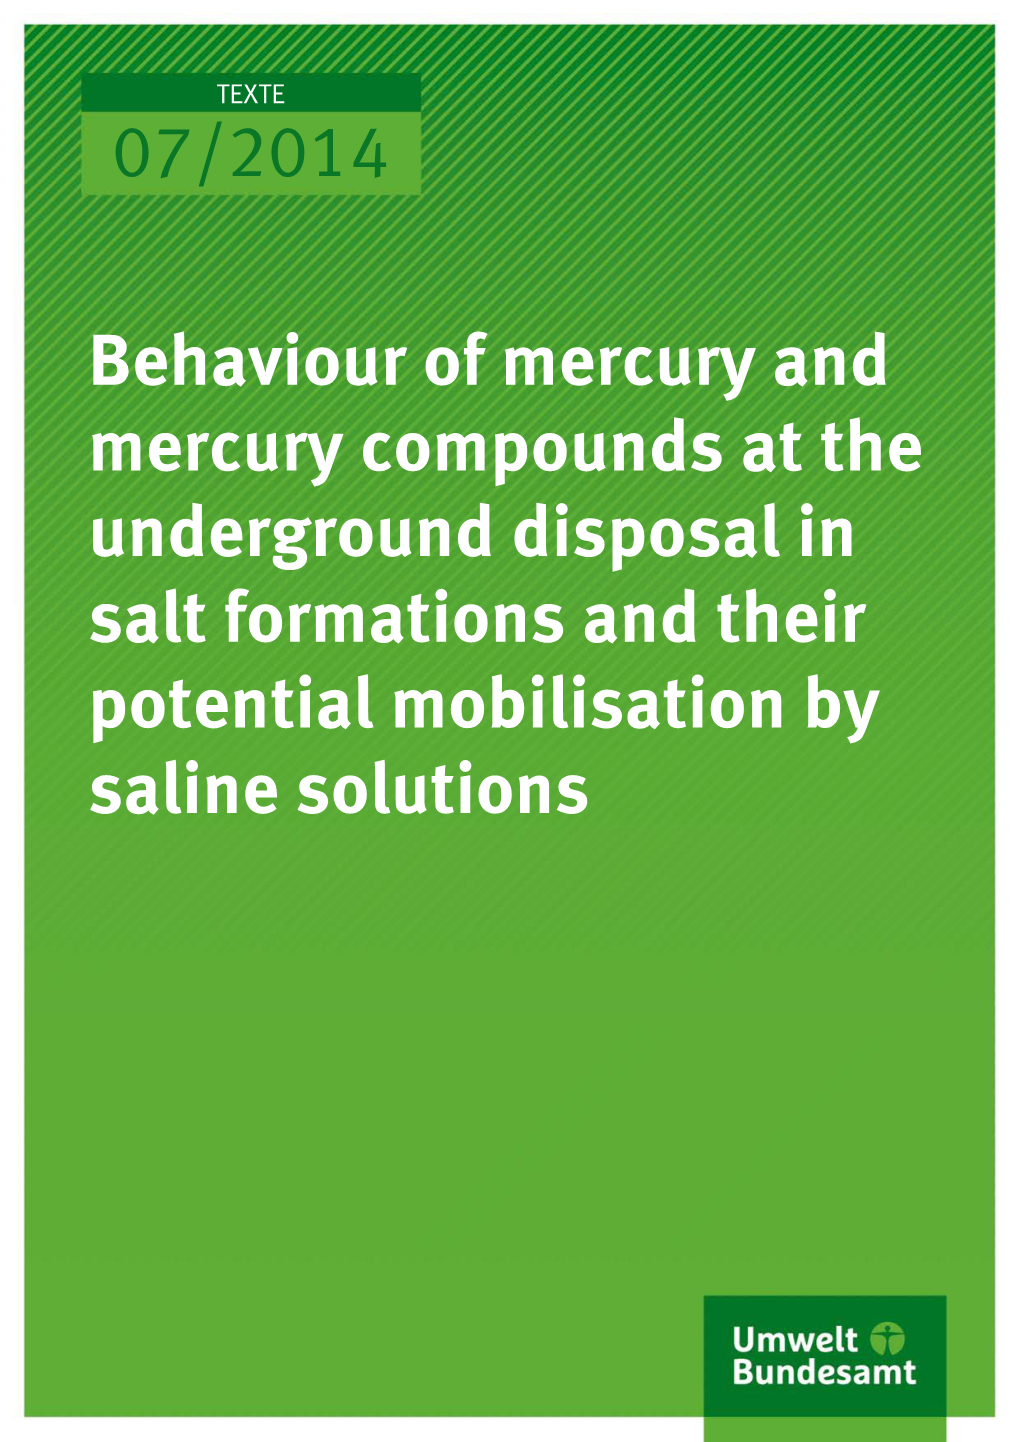 Behaviour of Mercury and Mercury Compounds at the Underground Disposal in Salt Formations and Their Potential Mobilisation by Saline Solutions